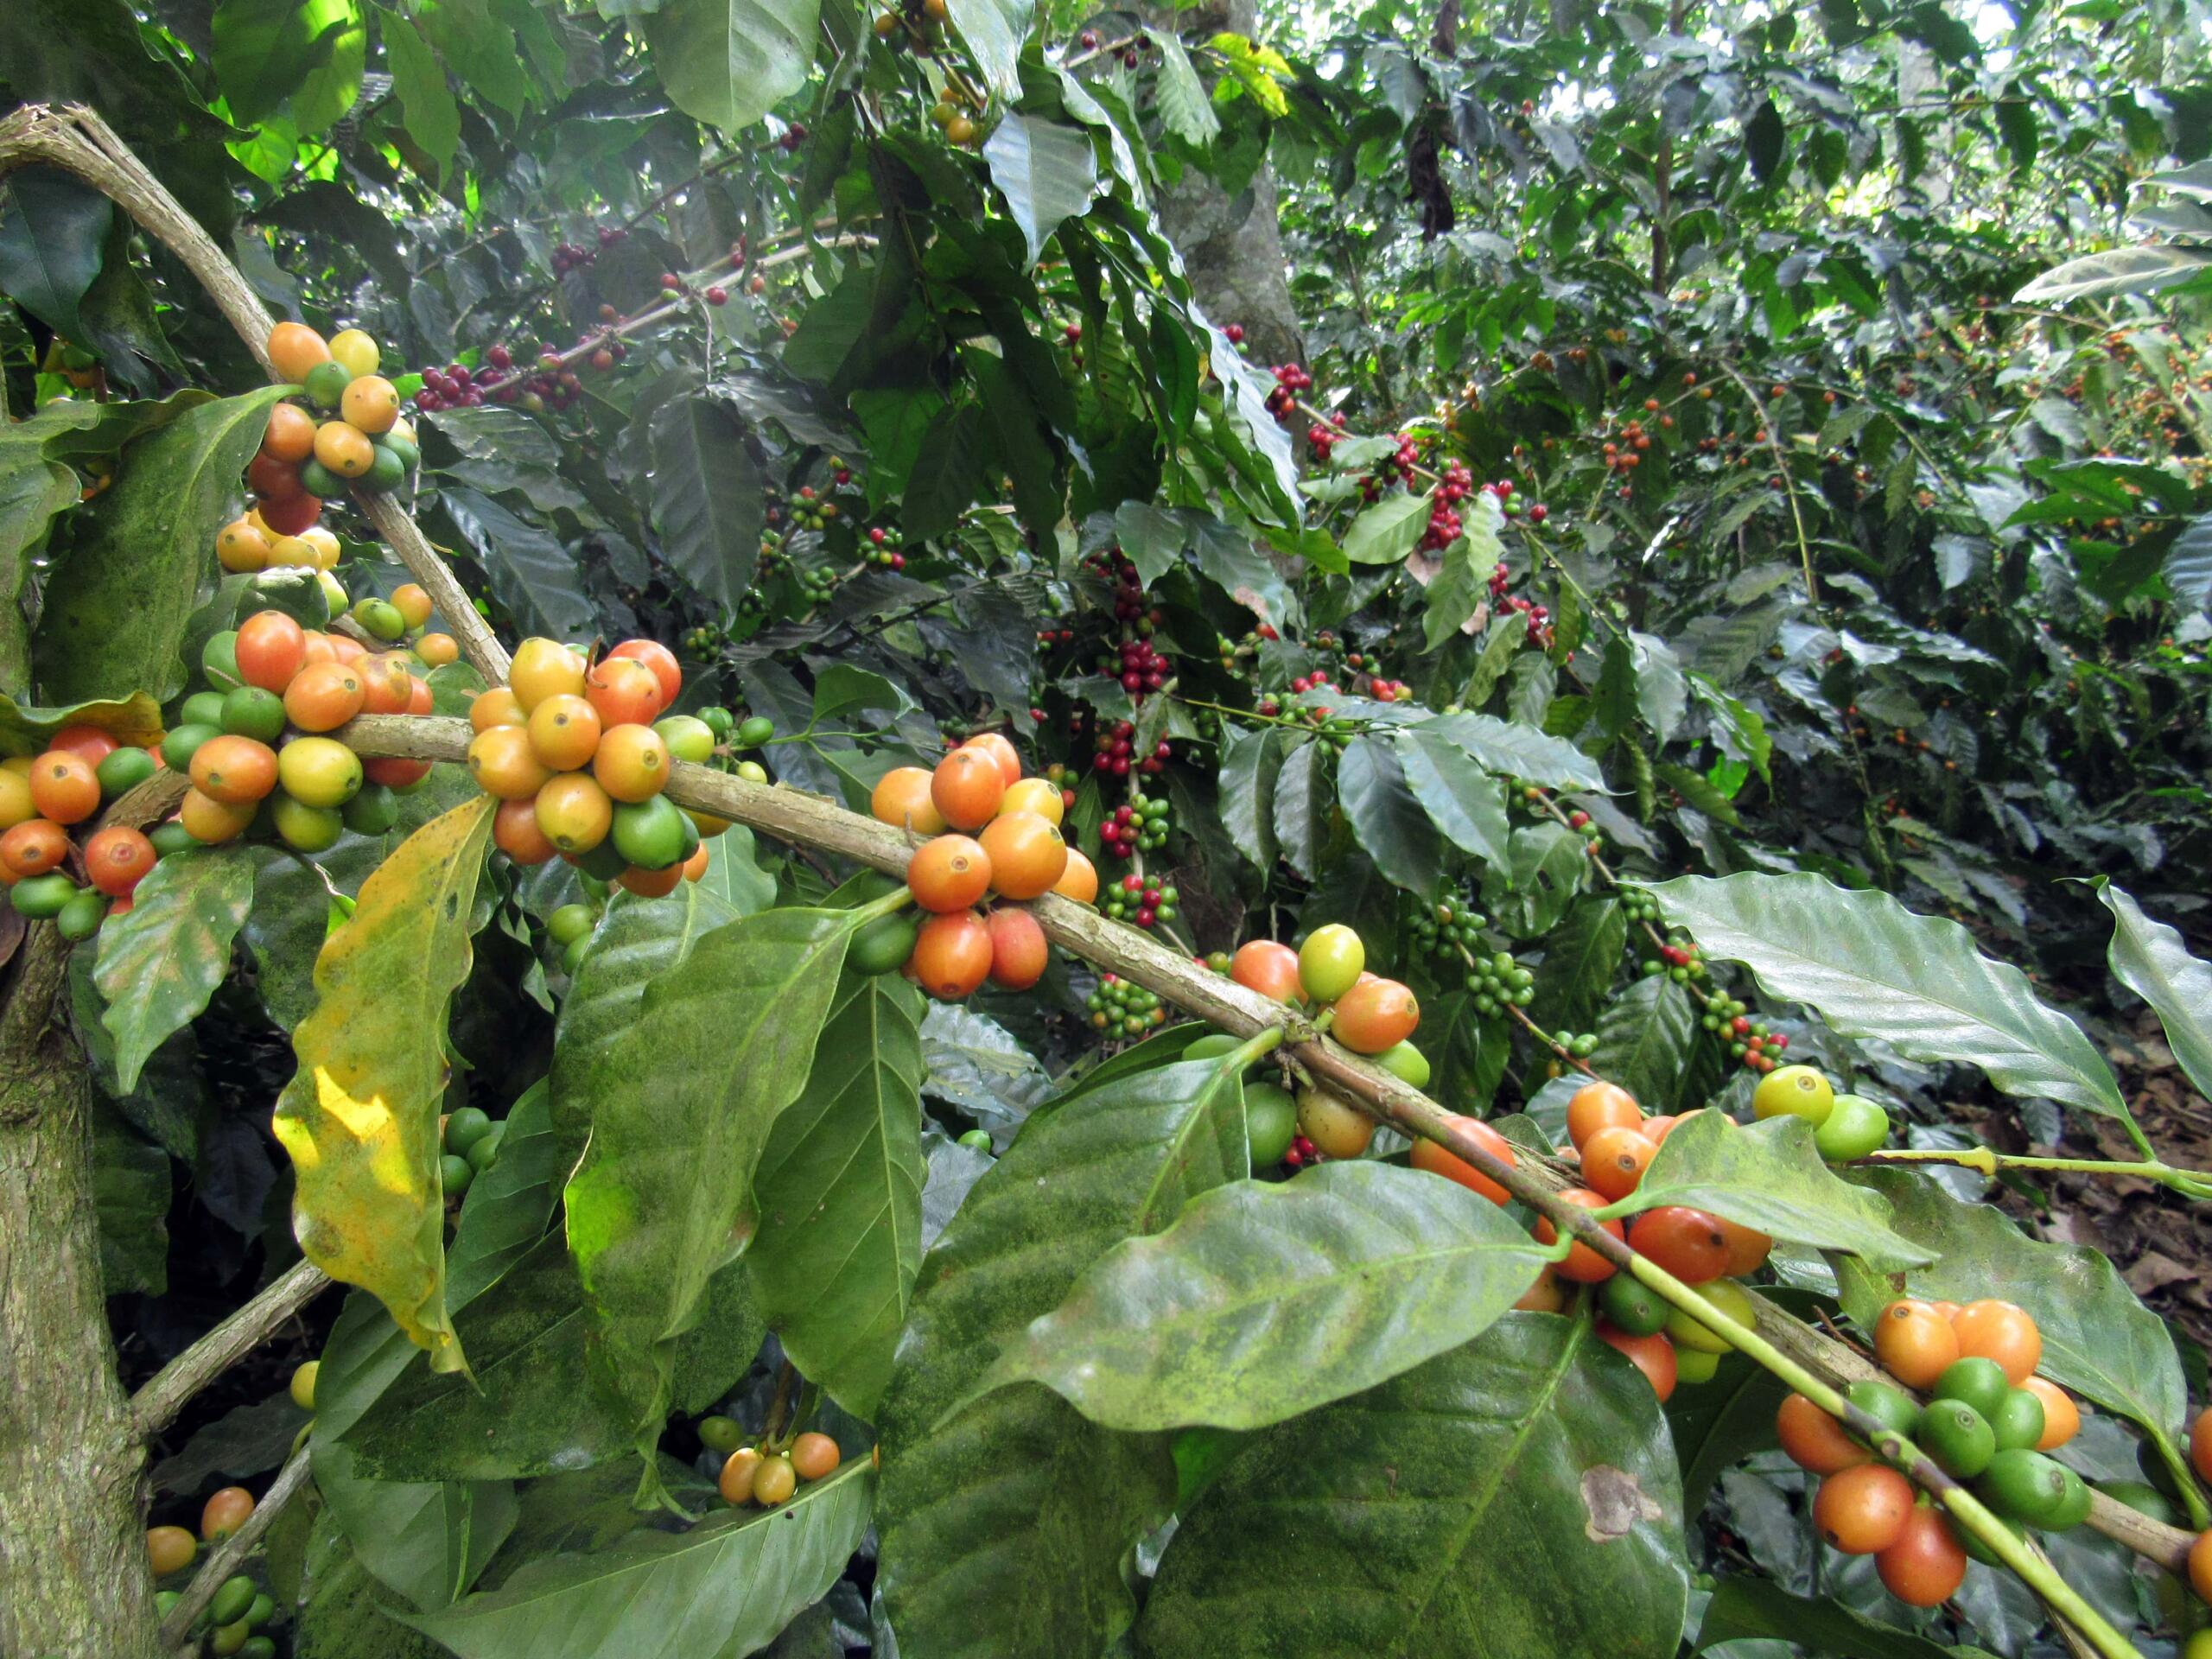 The Bourbon coffee variety growing on a tree